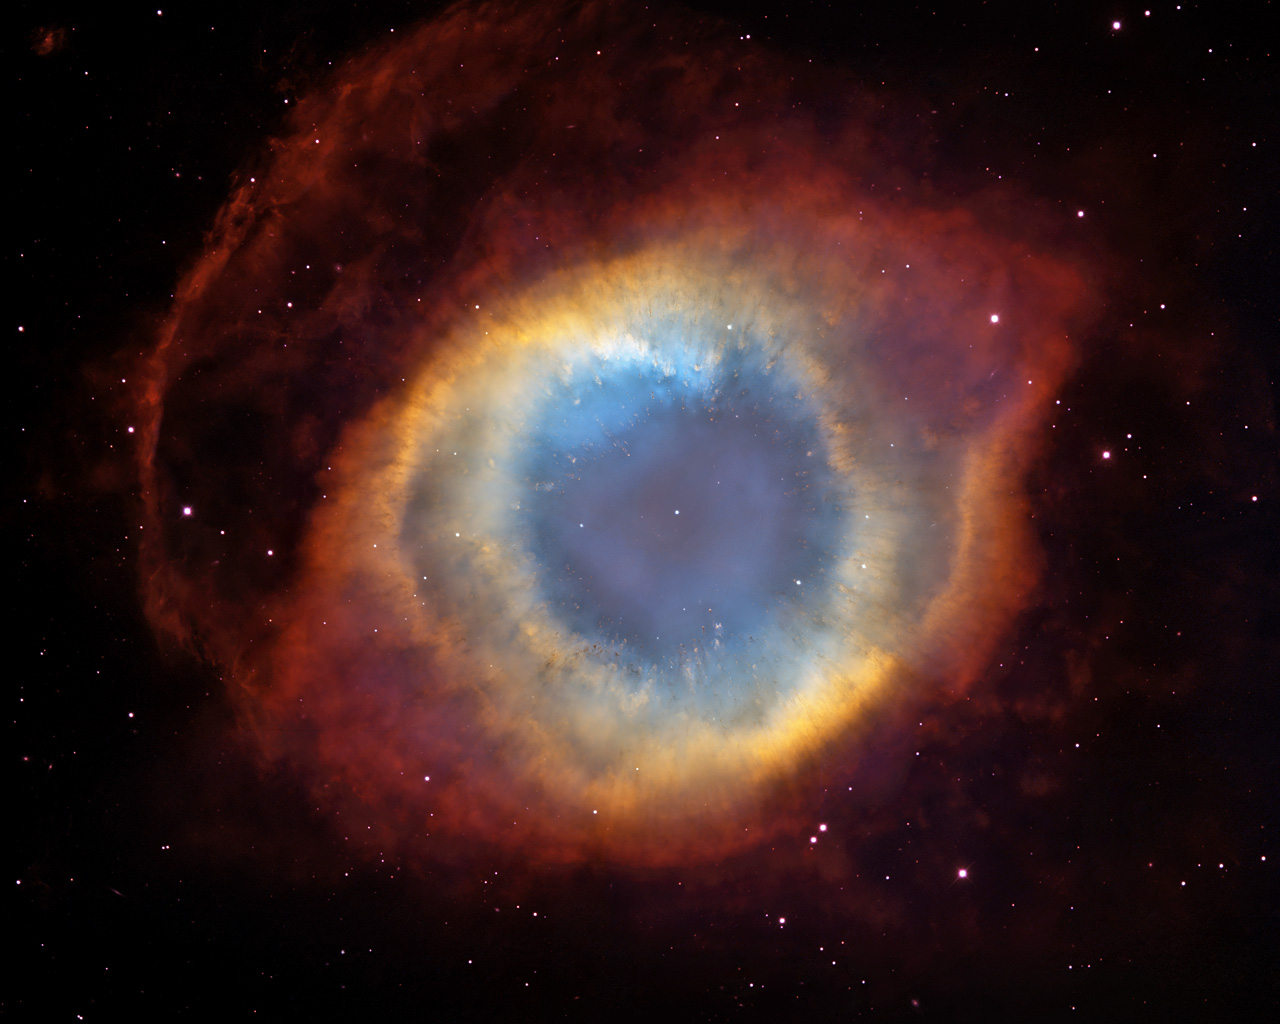 This composite image is a view of the colorful Helix Nebula taken with the Advanced Camera for Surveys aboard NASA/ESA Hubble Space Telescope and the Mosaic II Camera on the 4-meter telescope at Cerro Tololo Inter-American Observatory in Chile. The object is so large that both telescopes were needed to capture a complete view. The Helix is a planetary nebula, the glowing gaseous envelope expelled by a dying, sun-like star. The Helix resembles a simple doughnut as seen from Earth. But looks can be deceiving. New evidence suggests that the Helix consists of two gaseous disks nearly perpendicular to each other.